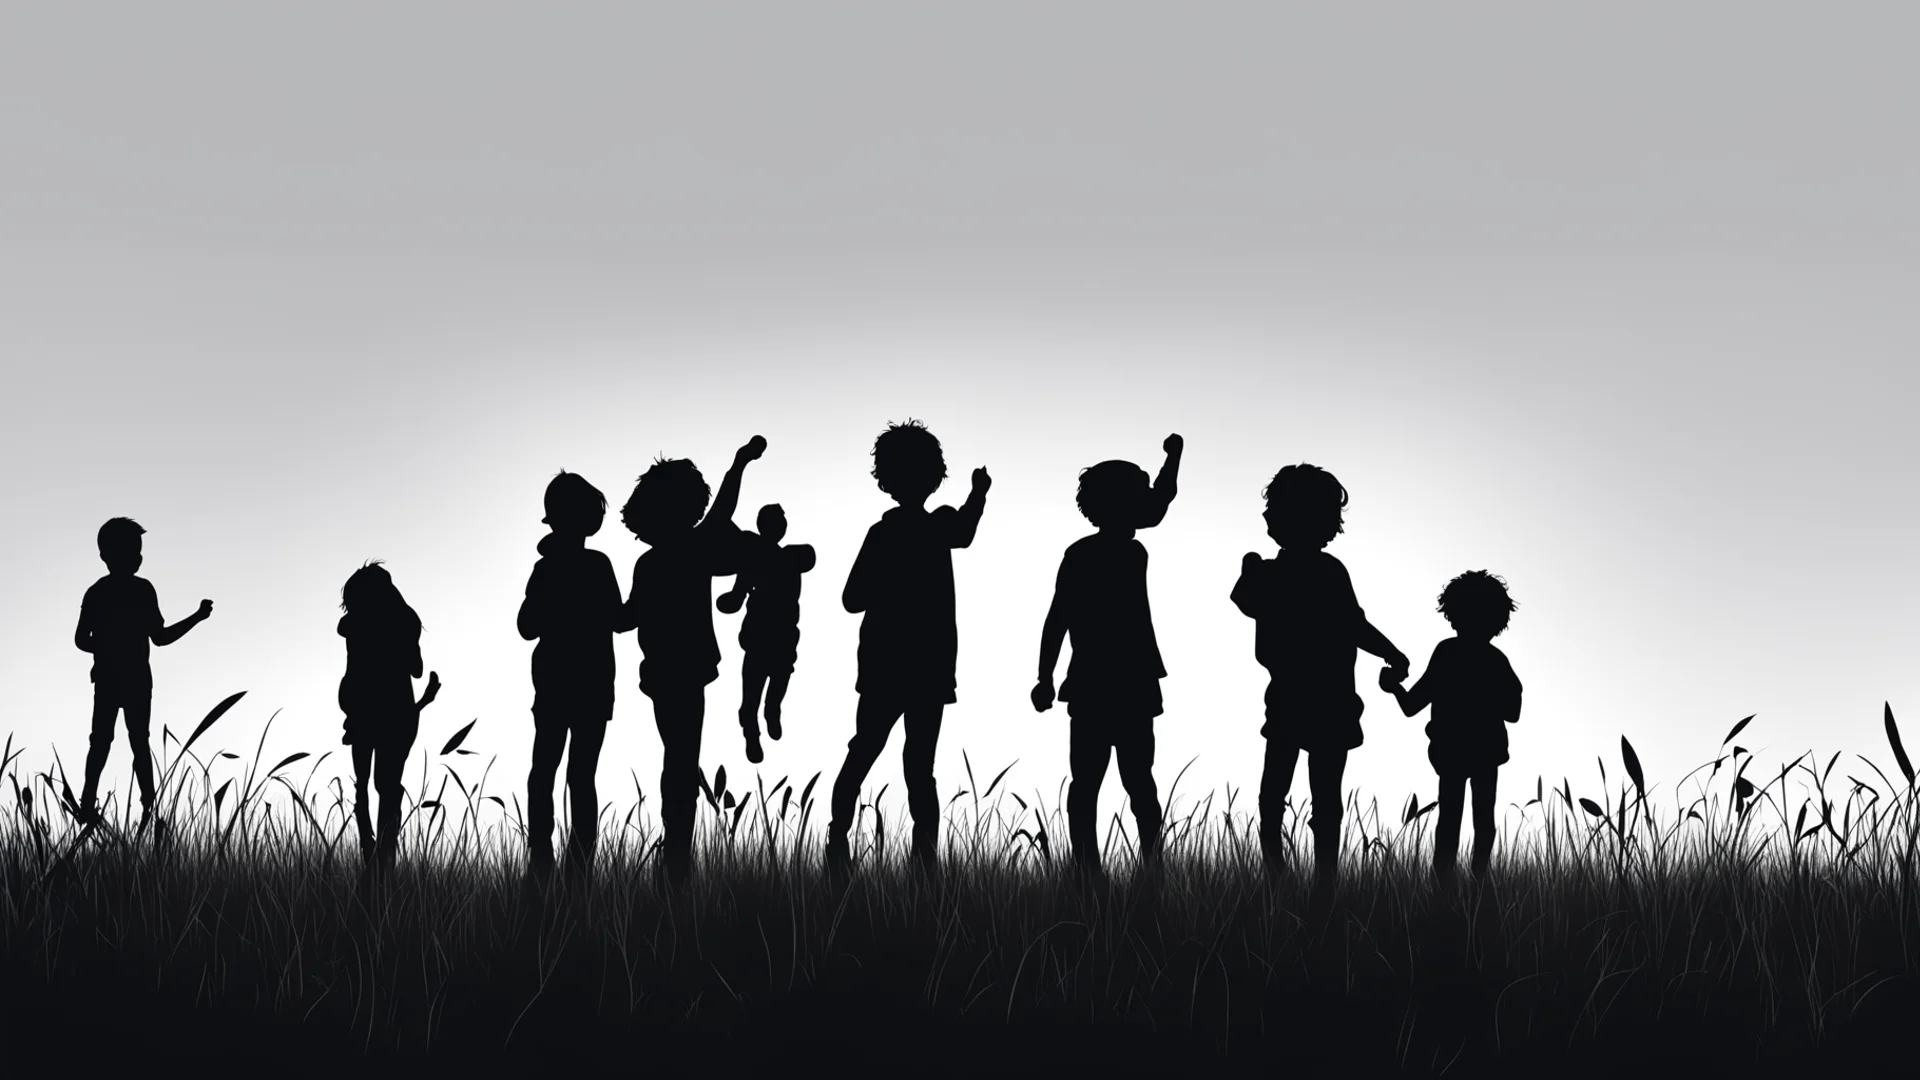 draw a silhouette of a group of boys and girls playing in a field wide